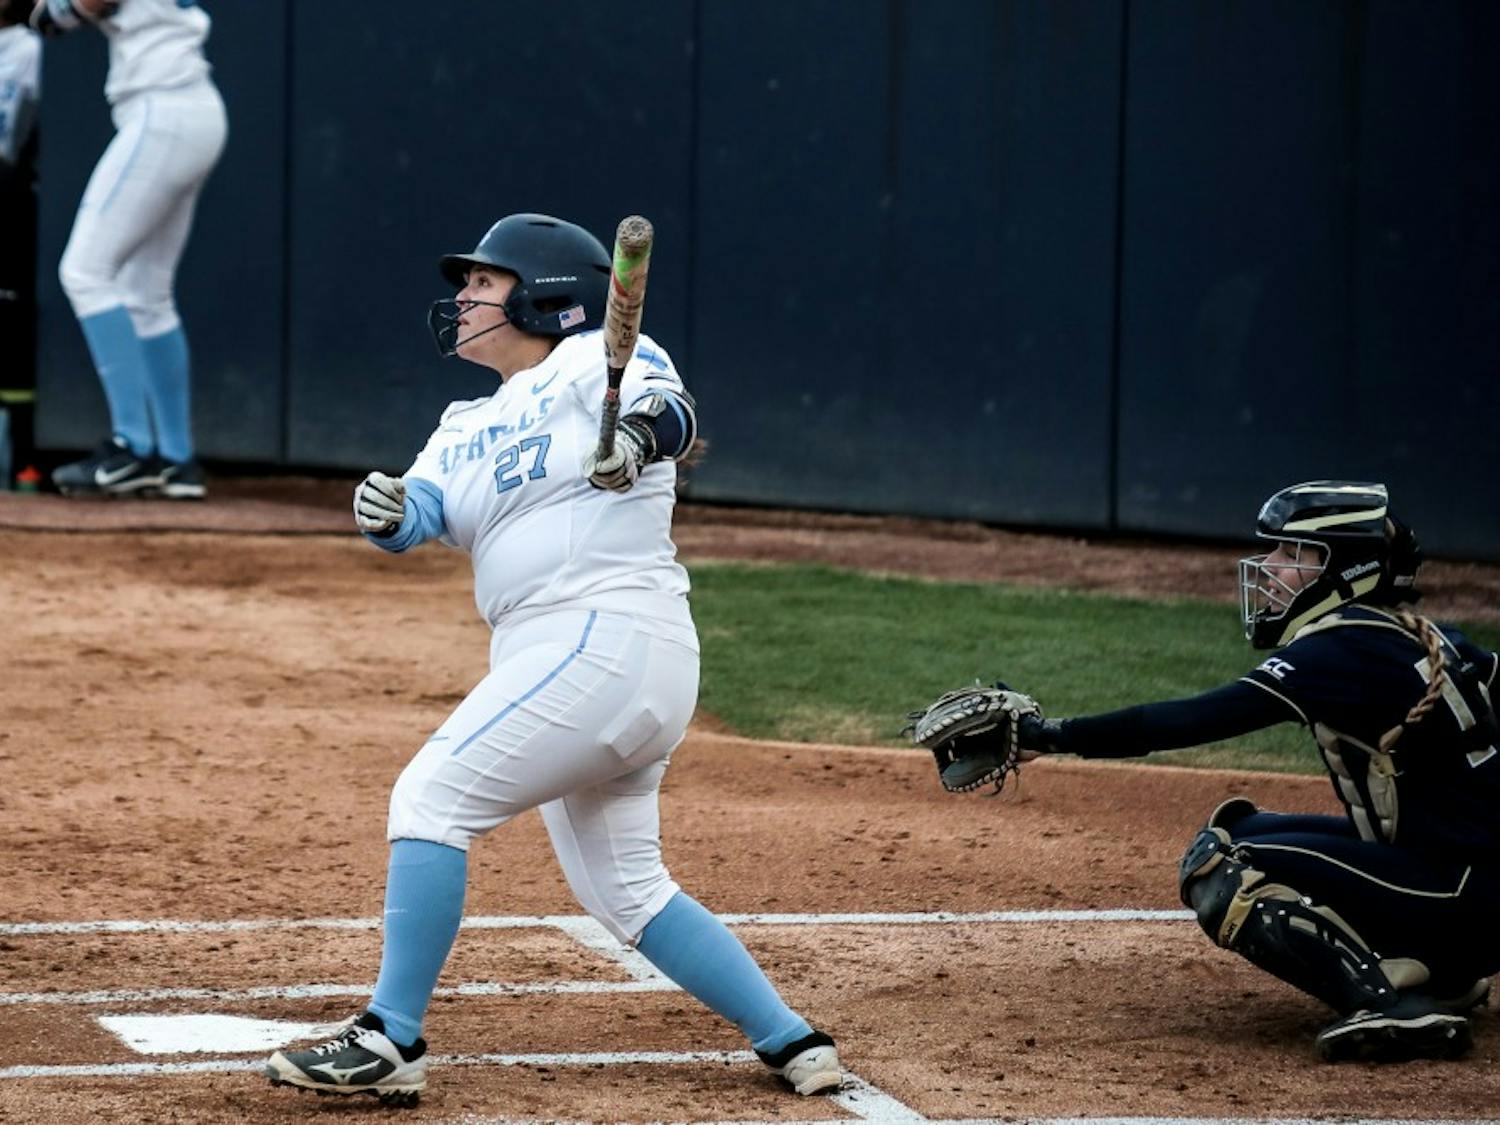 UNC senior third baseman Berlynne Delamora (27) looks in to the sky after hitting the ball during the 4-1 win over Georgia Tech on Friday, March 22, 2019 in Anderson Stadium in Chapel Hill, N.C. The Tar Heels improved their record to 6-1 in ACC play.